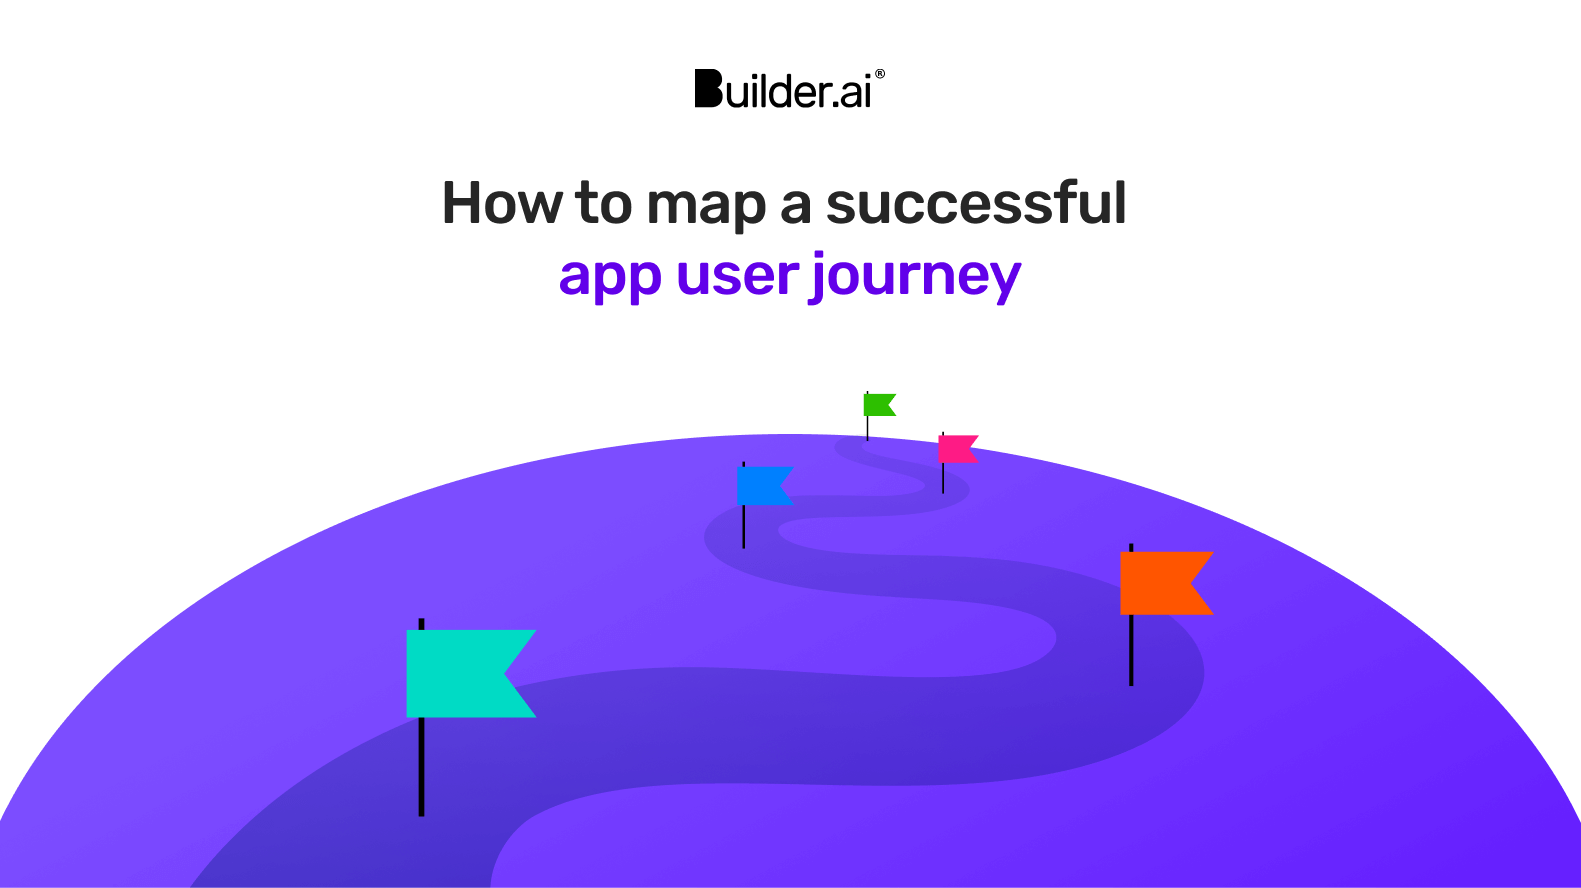 6 stupidly simple steps to mapping app user journeys